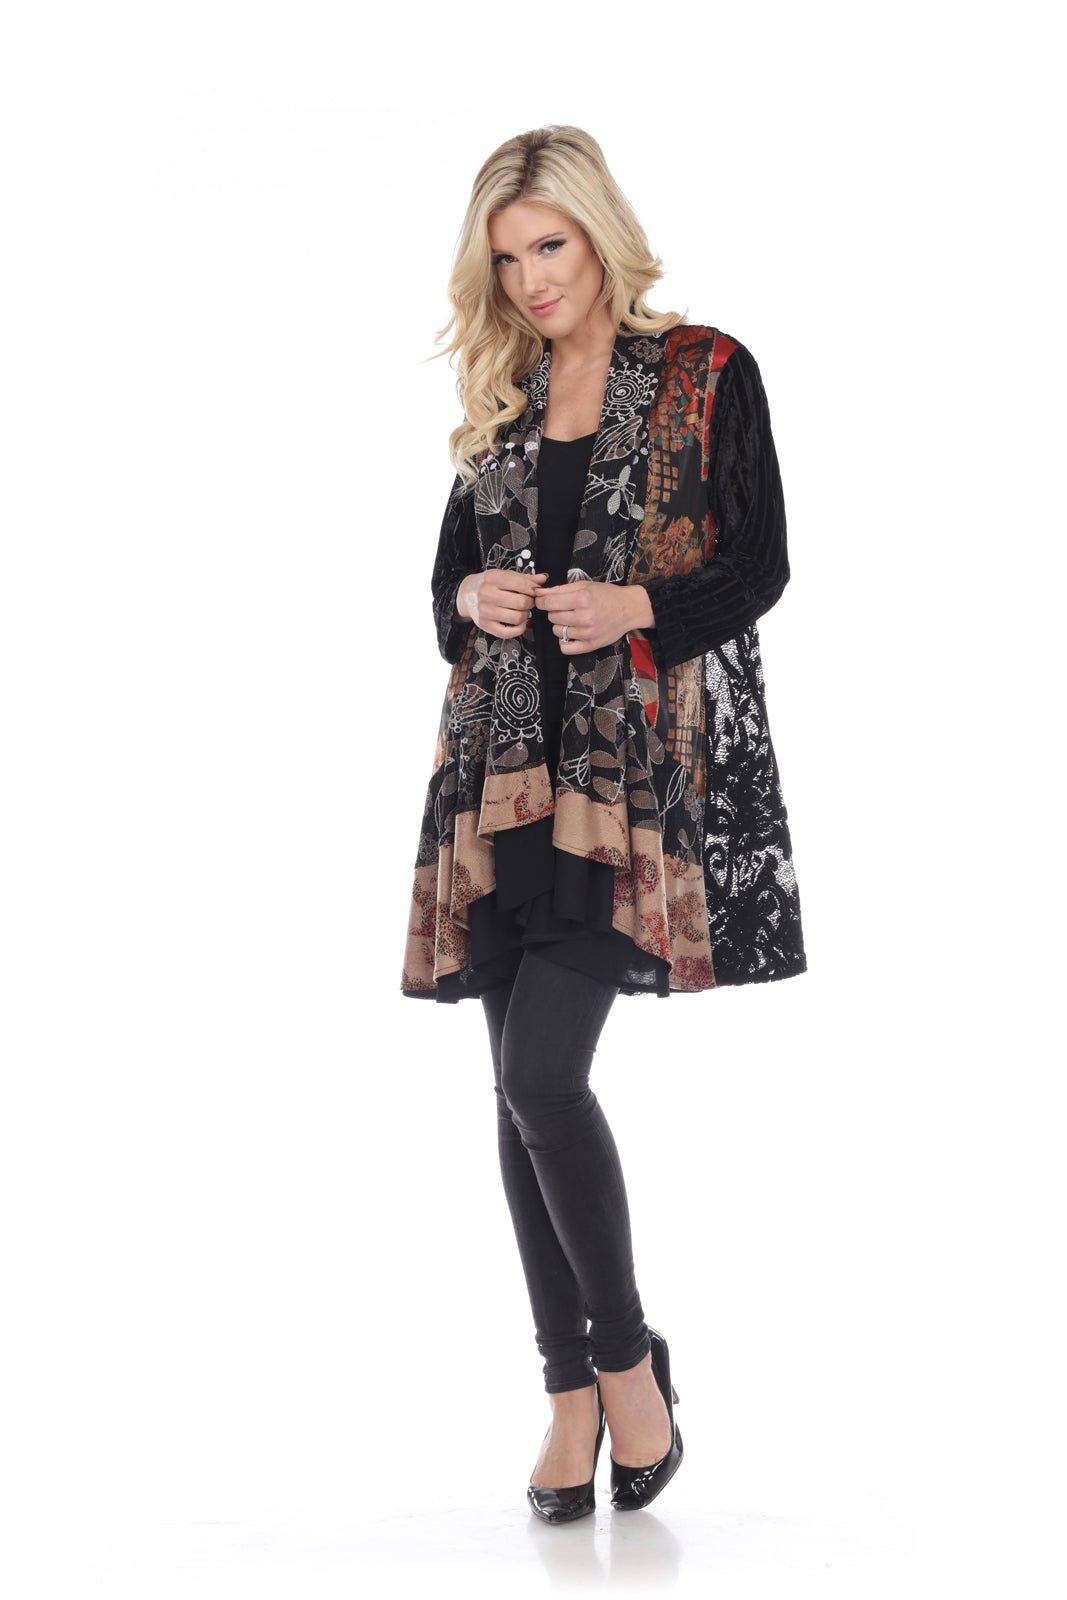 SLINKY Brand Sheer Floral Cascade Front or Tie Front Cardigan